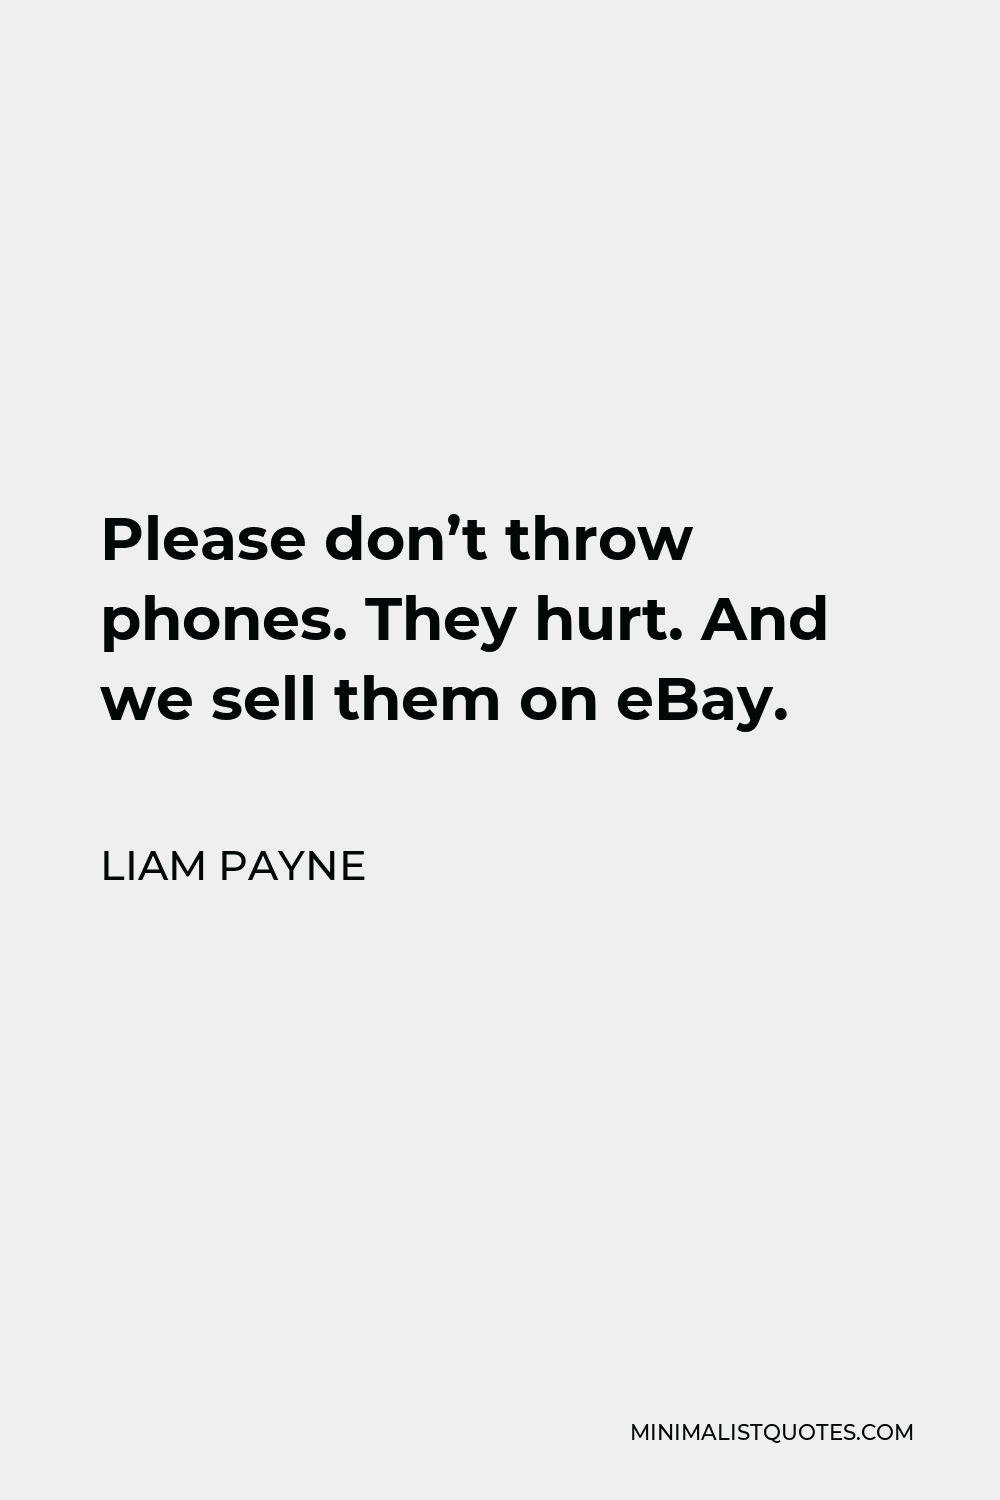 Liam Payne Quote - Please don’t throw phones. They hurt. And we sell them on eBay.